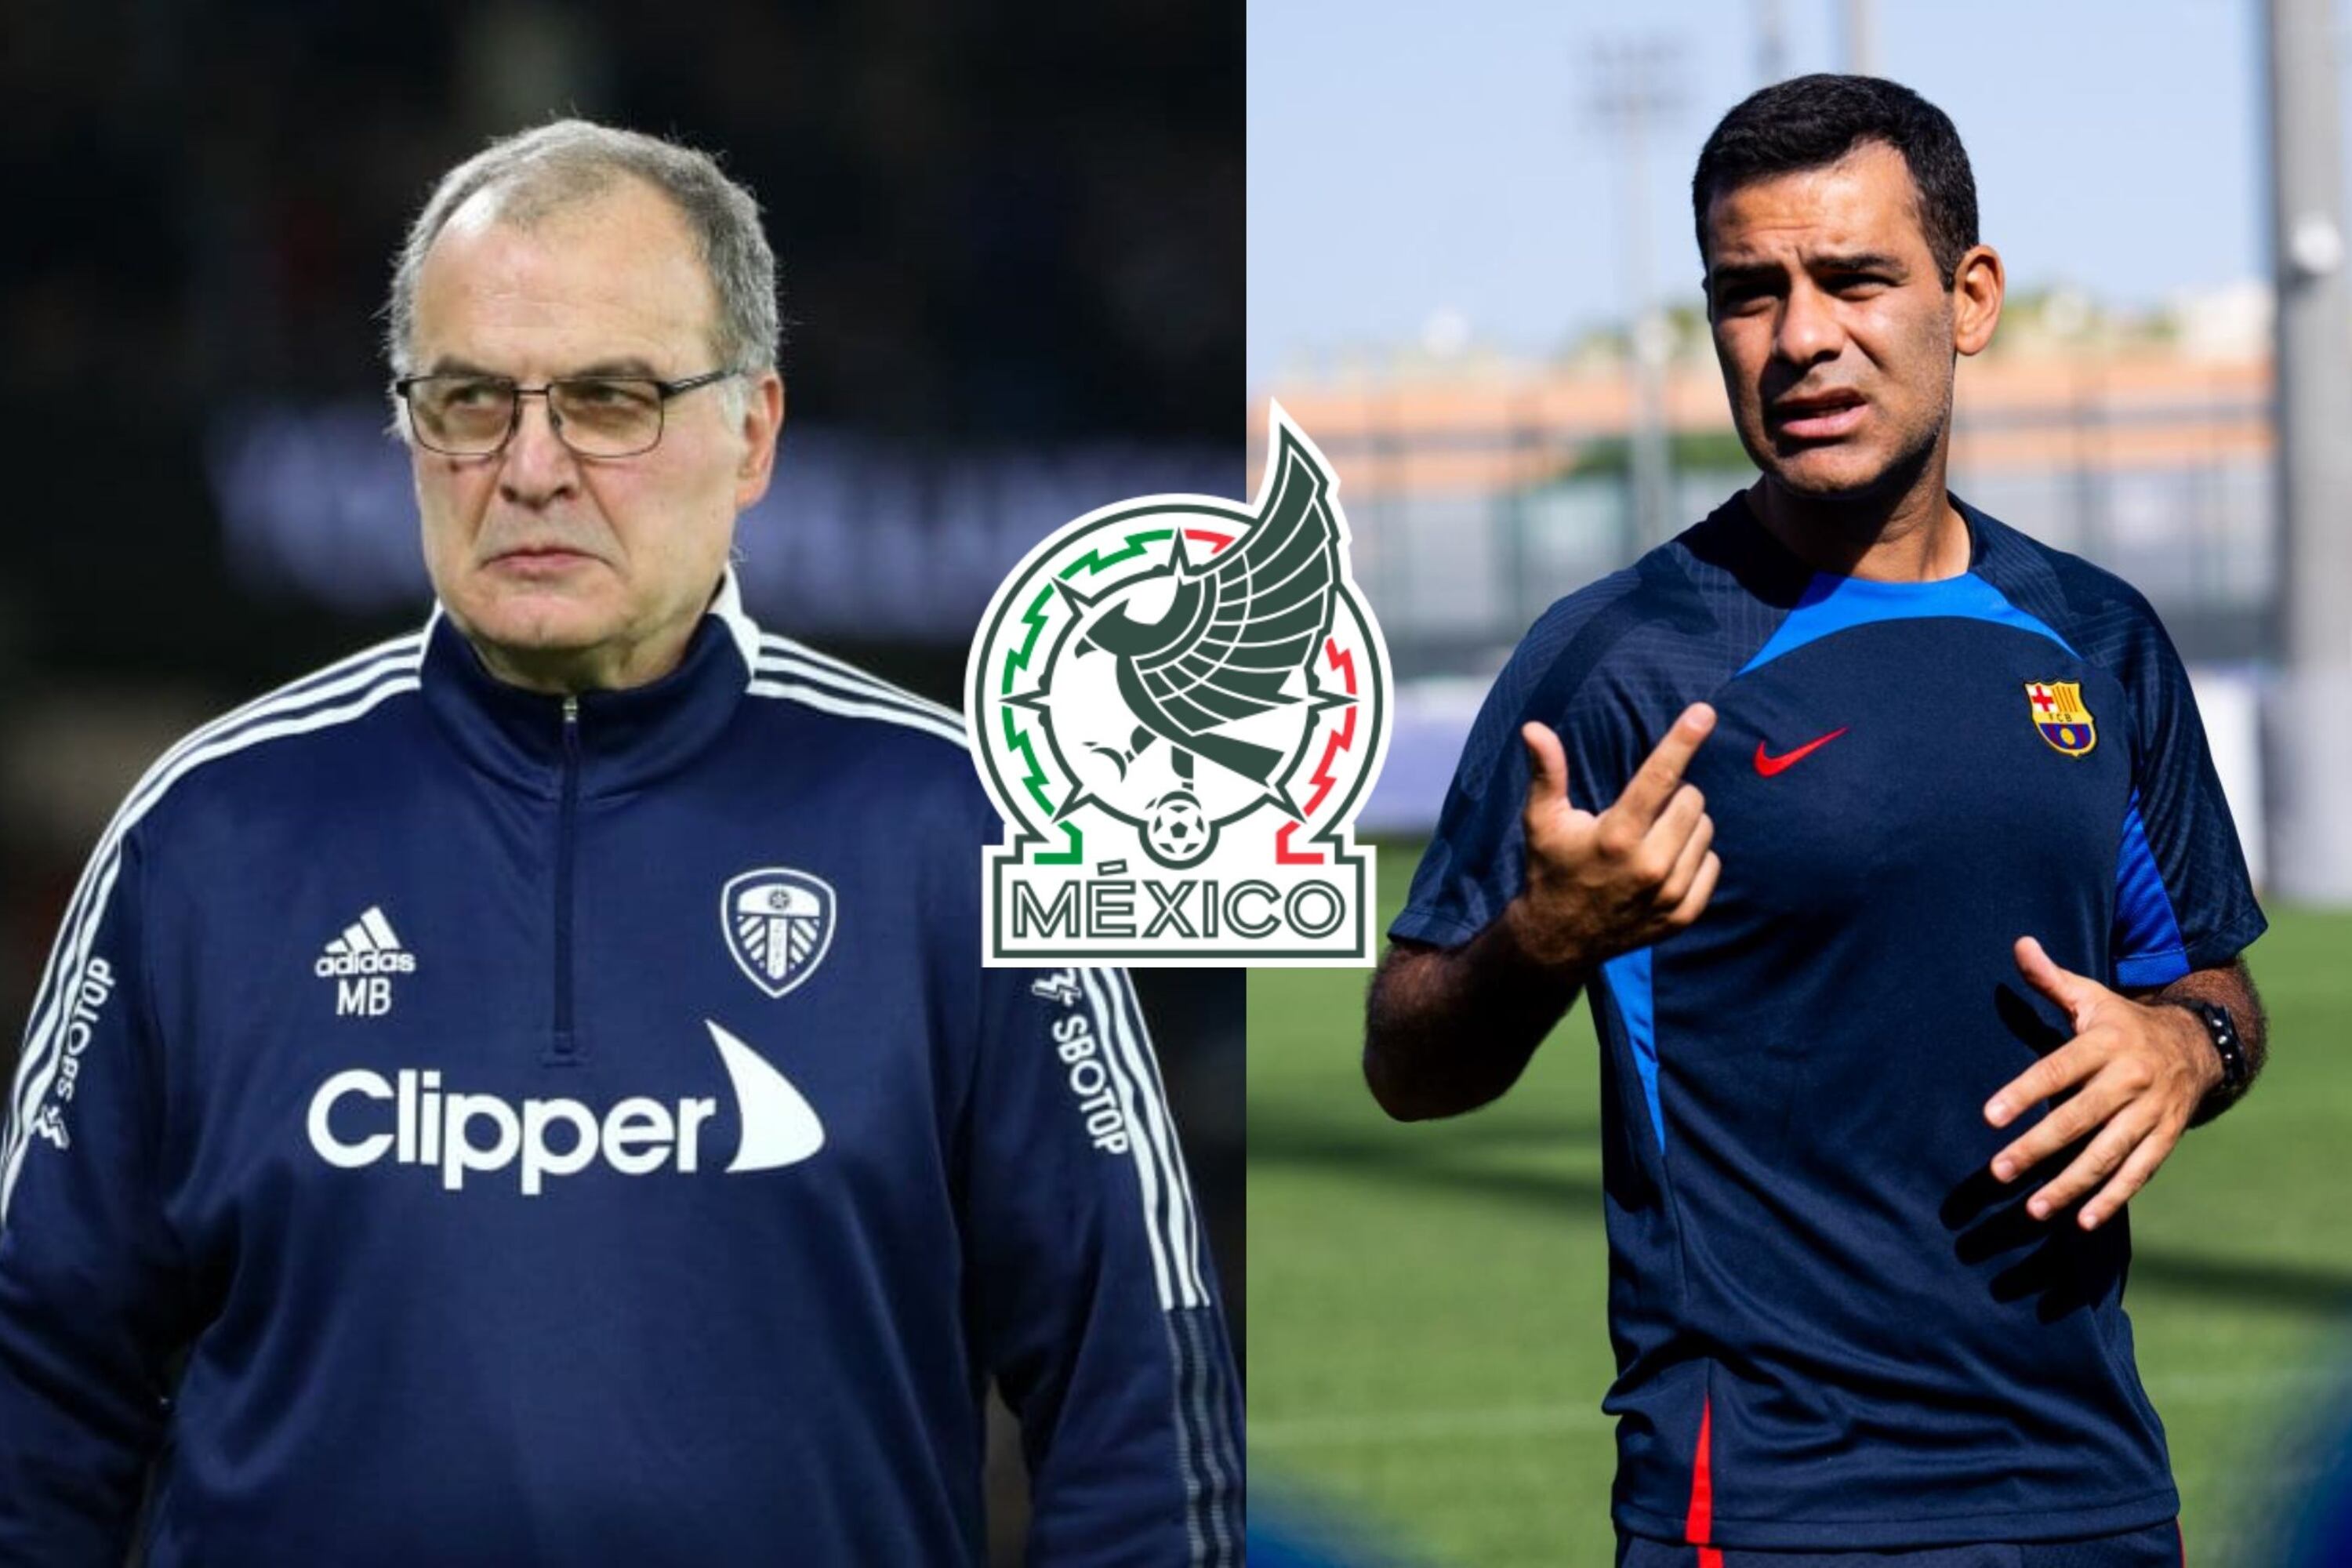 While Bielsa asks for 10 million, the salary Rafa Marquez would get if he signs with El Tri